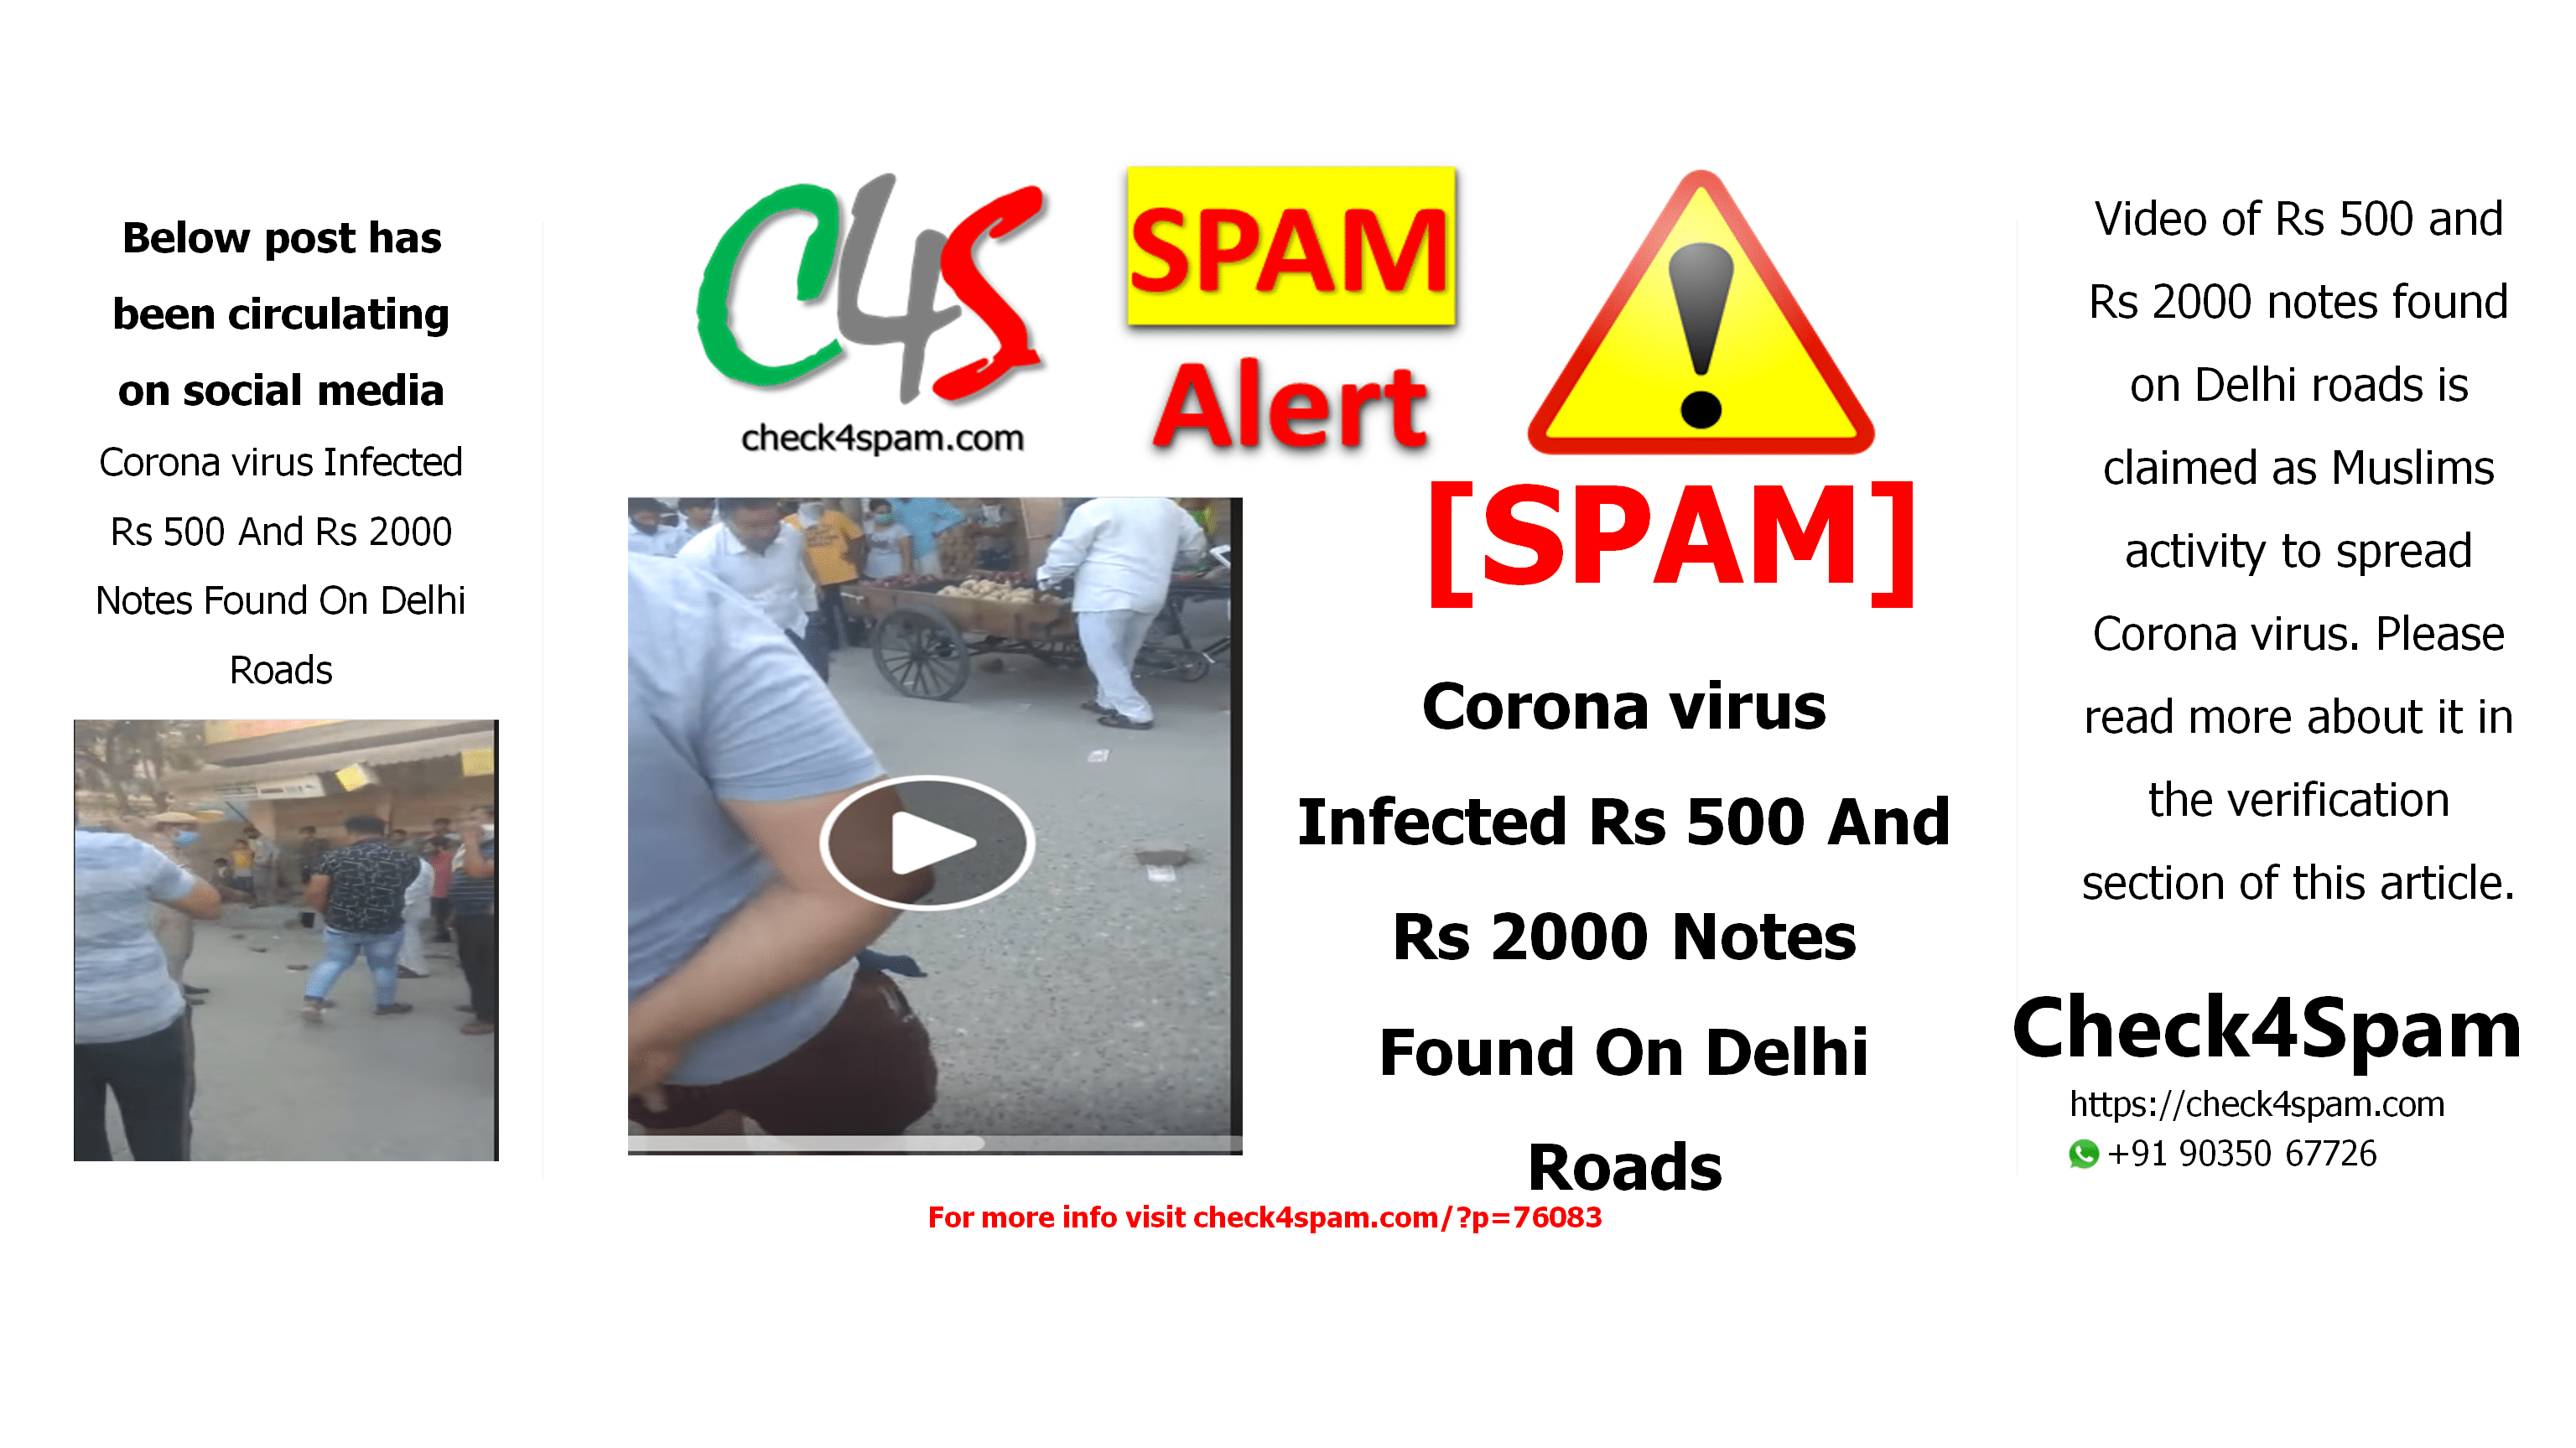 Coronavirus Infected Rs 500 And Rs 2000 Notes Found On Delhi Roads